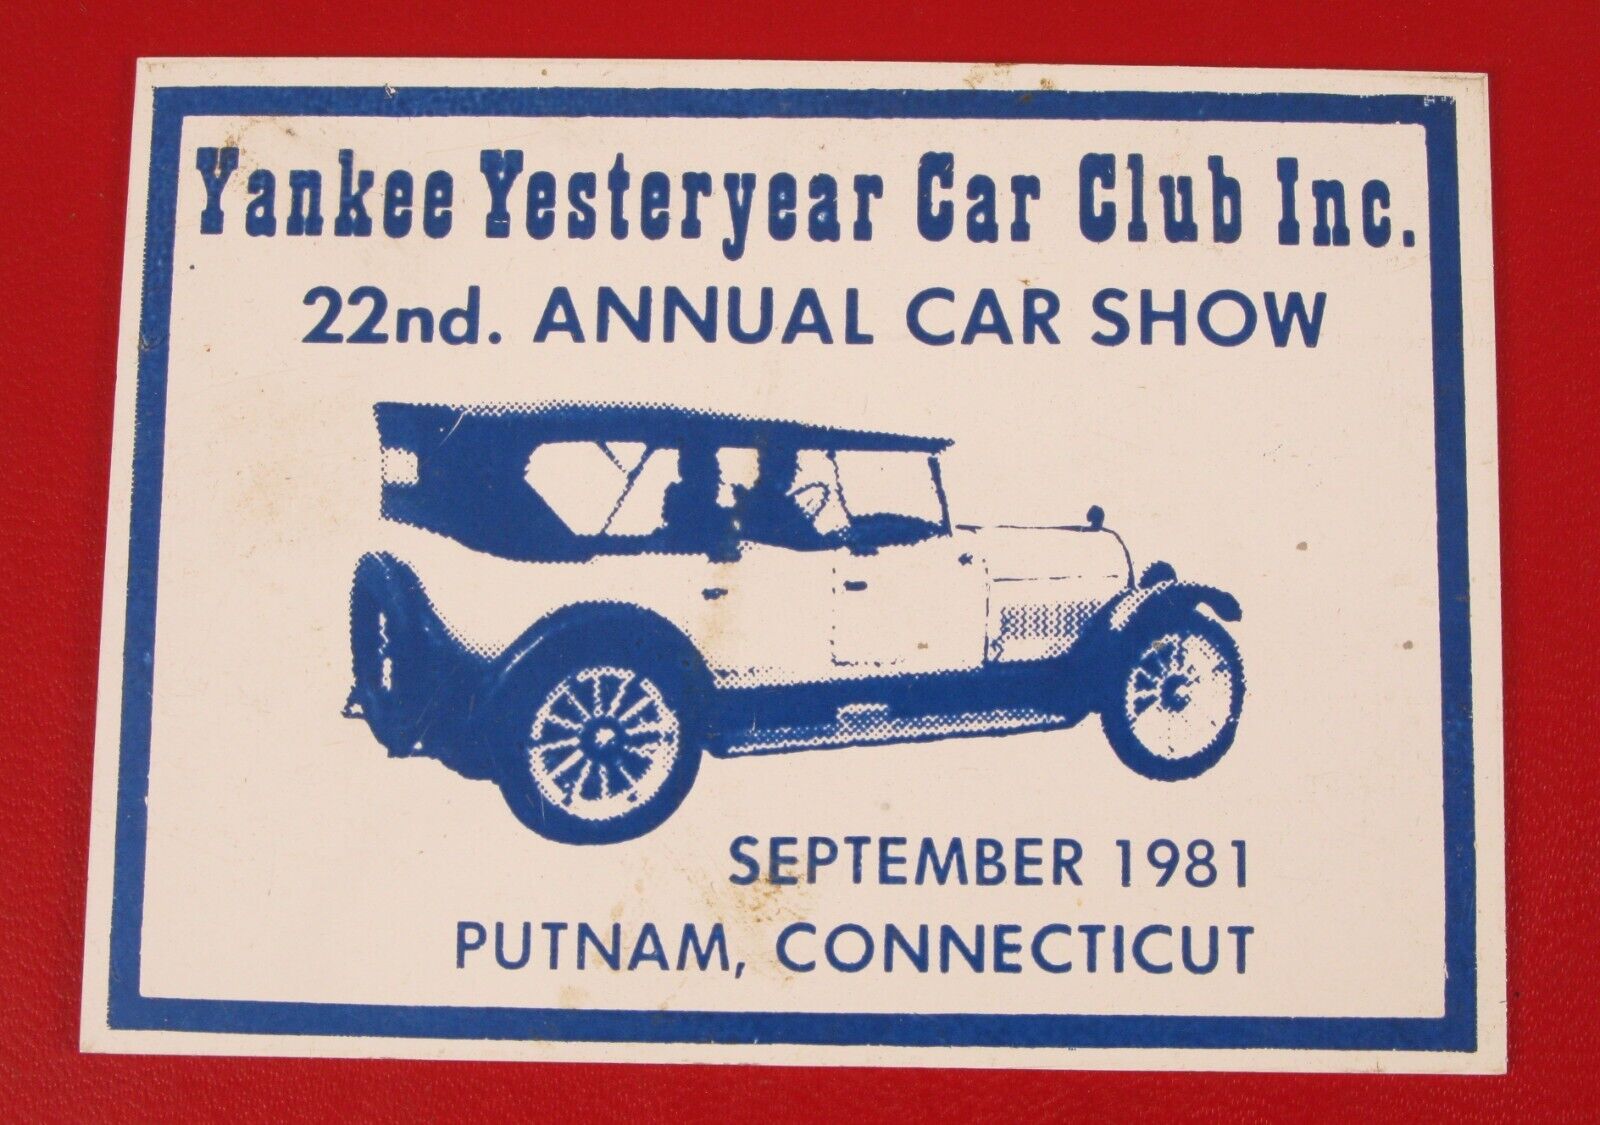 VINTAGE 1981 YANKEE YESTERYEAR ANTIQUE CAR CLUB ANNUAL MEET METAL PLAQUE SIGN 